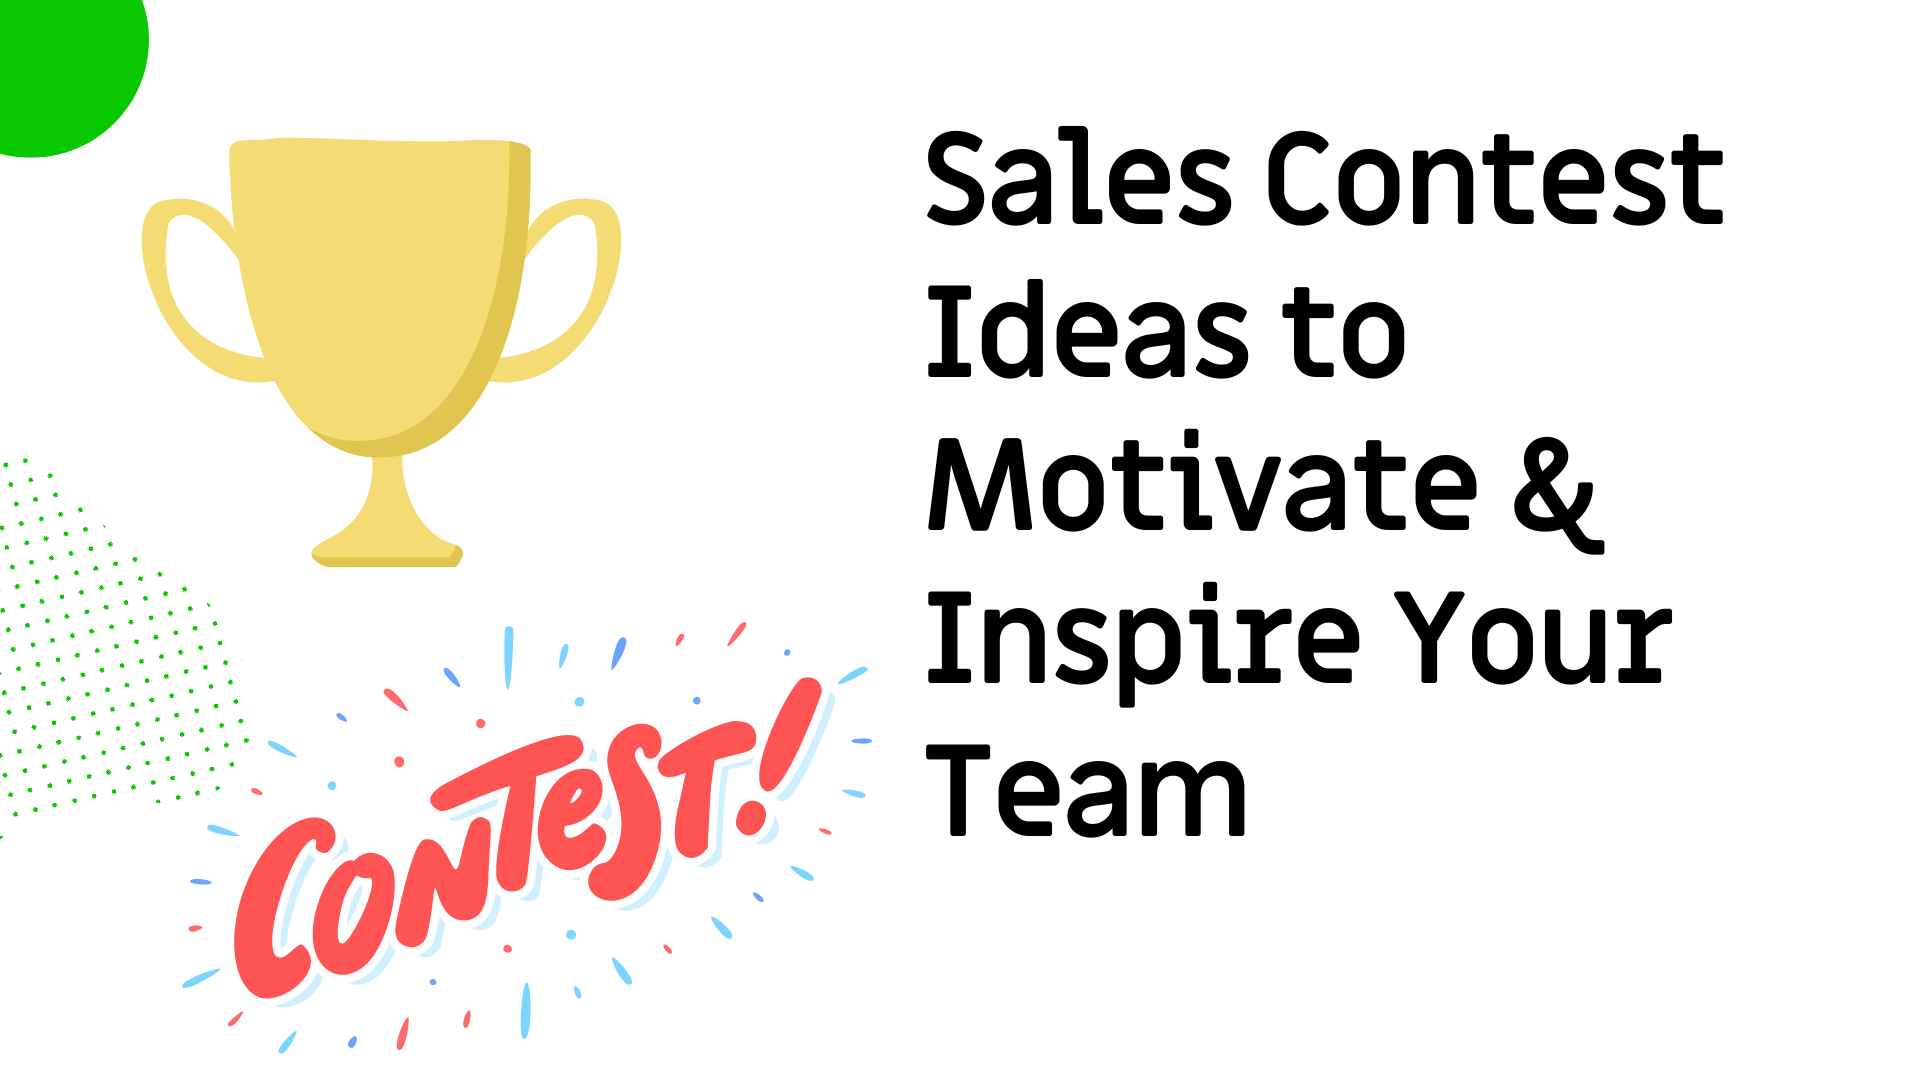 Sales Contest Ideas to Motivate & Inspire Your Team